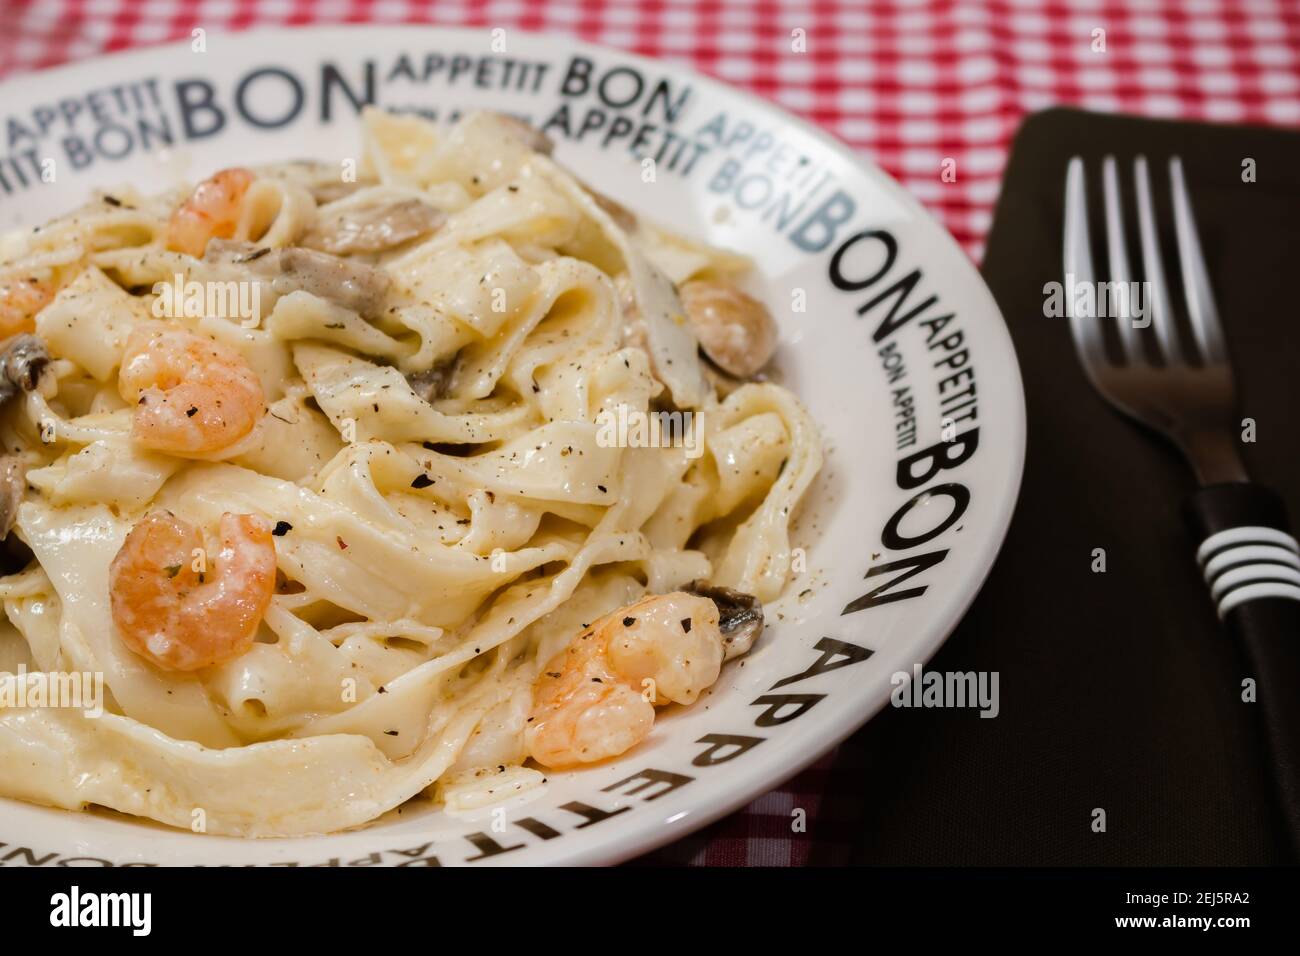 Delicious fettuccine with cream sauce of mushrooms and shrimp on a plate that says Bon Appetite with red checkered tablecloth. Italian cuisine. Stock Photo